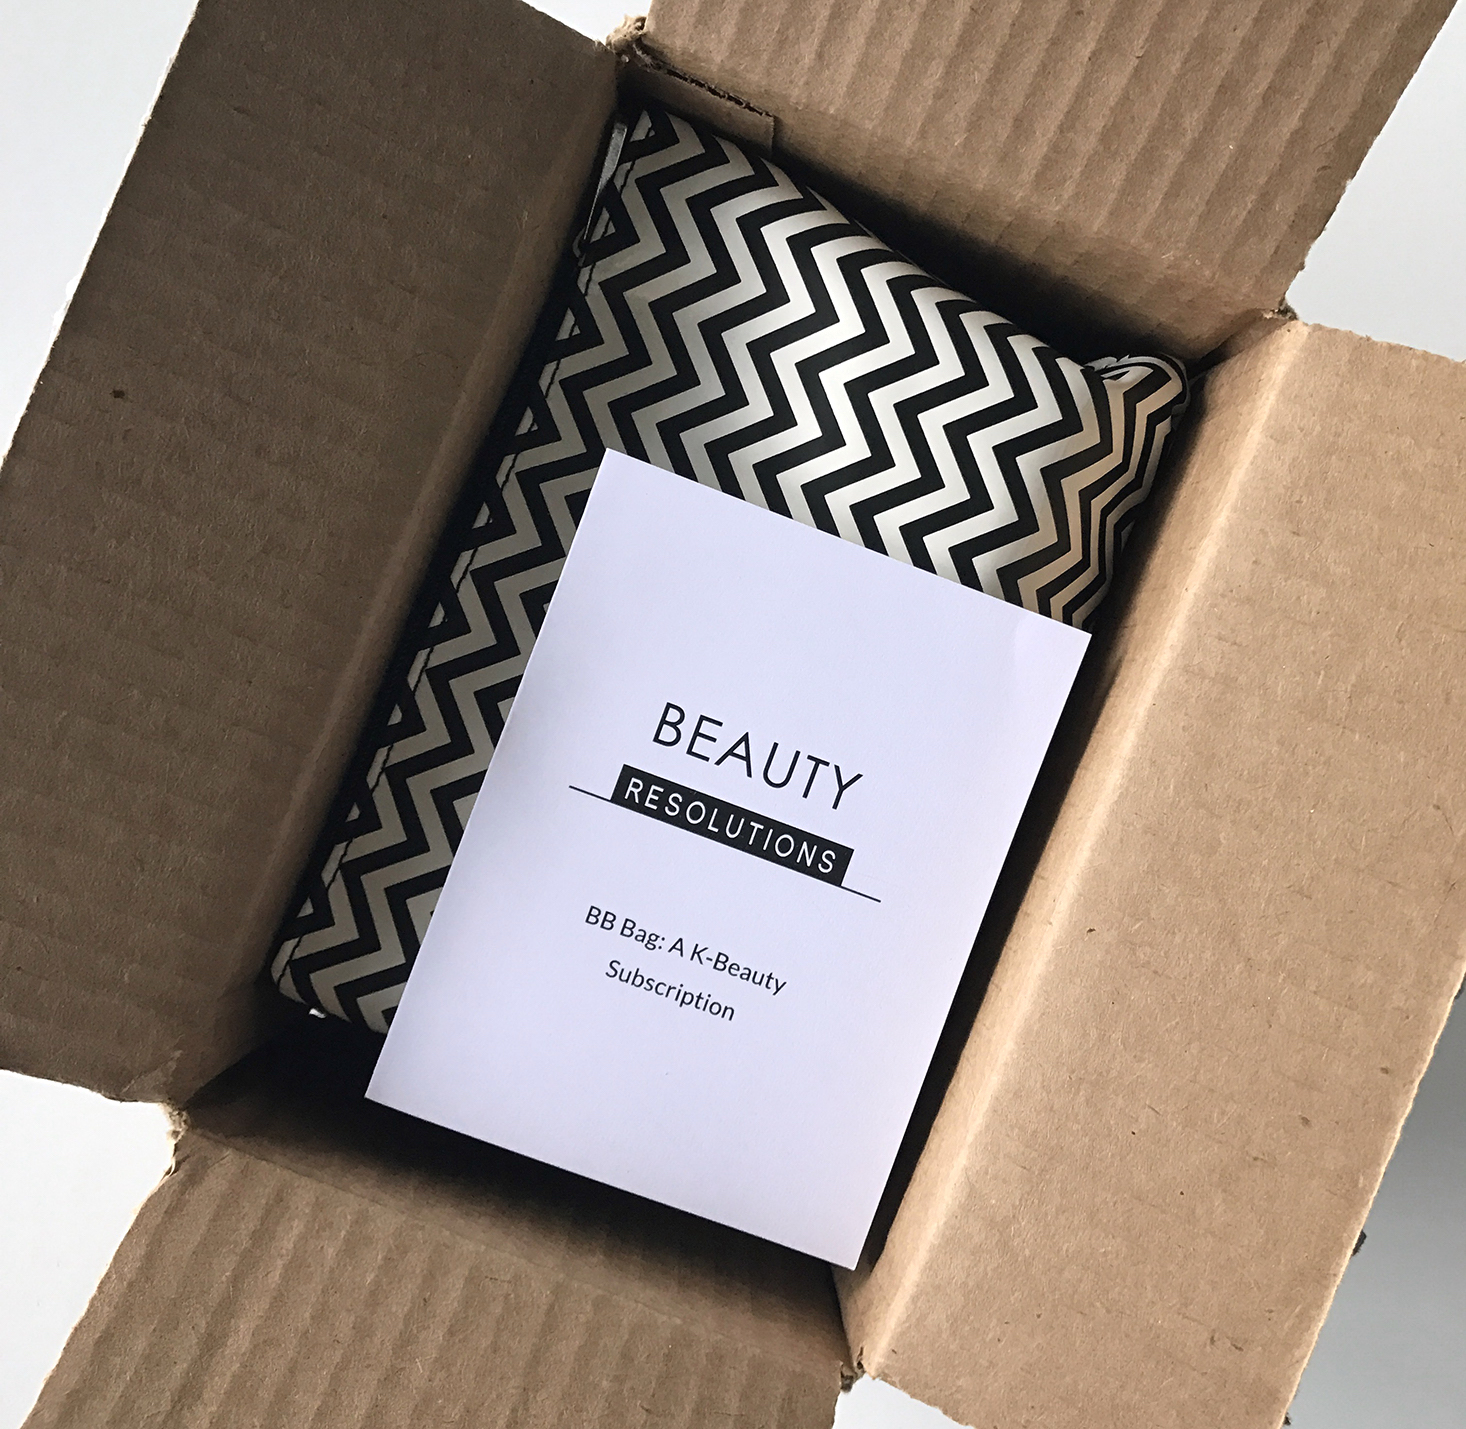 Beauteque BB Bag Subscription Review + Coupon- January 2017